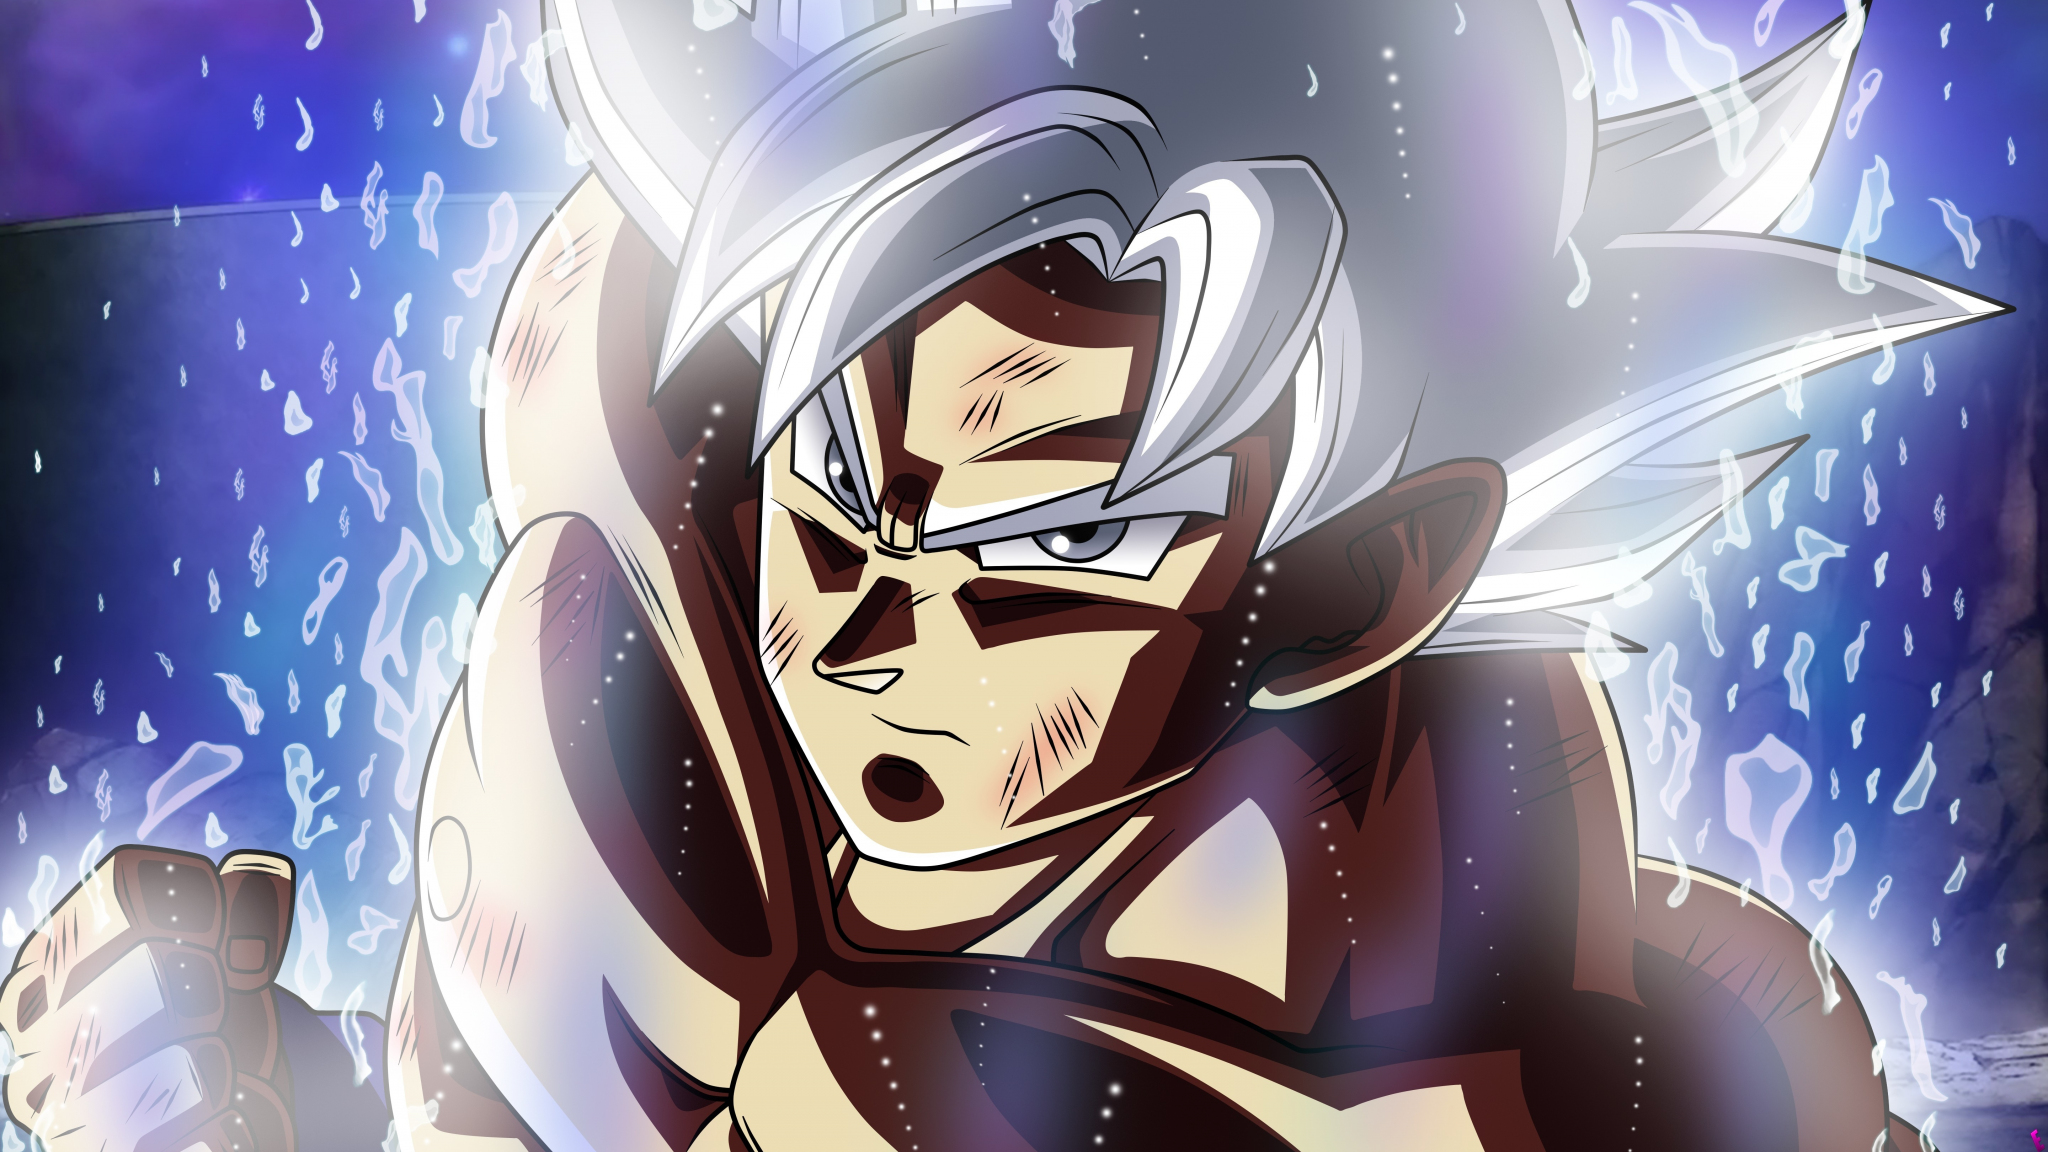 Download goku, ready for punch, anime 2048x1152 wallpaper, dual wide 2048x1152 HD image, background, 5671